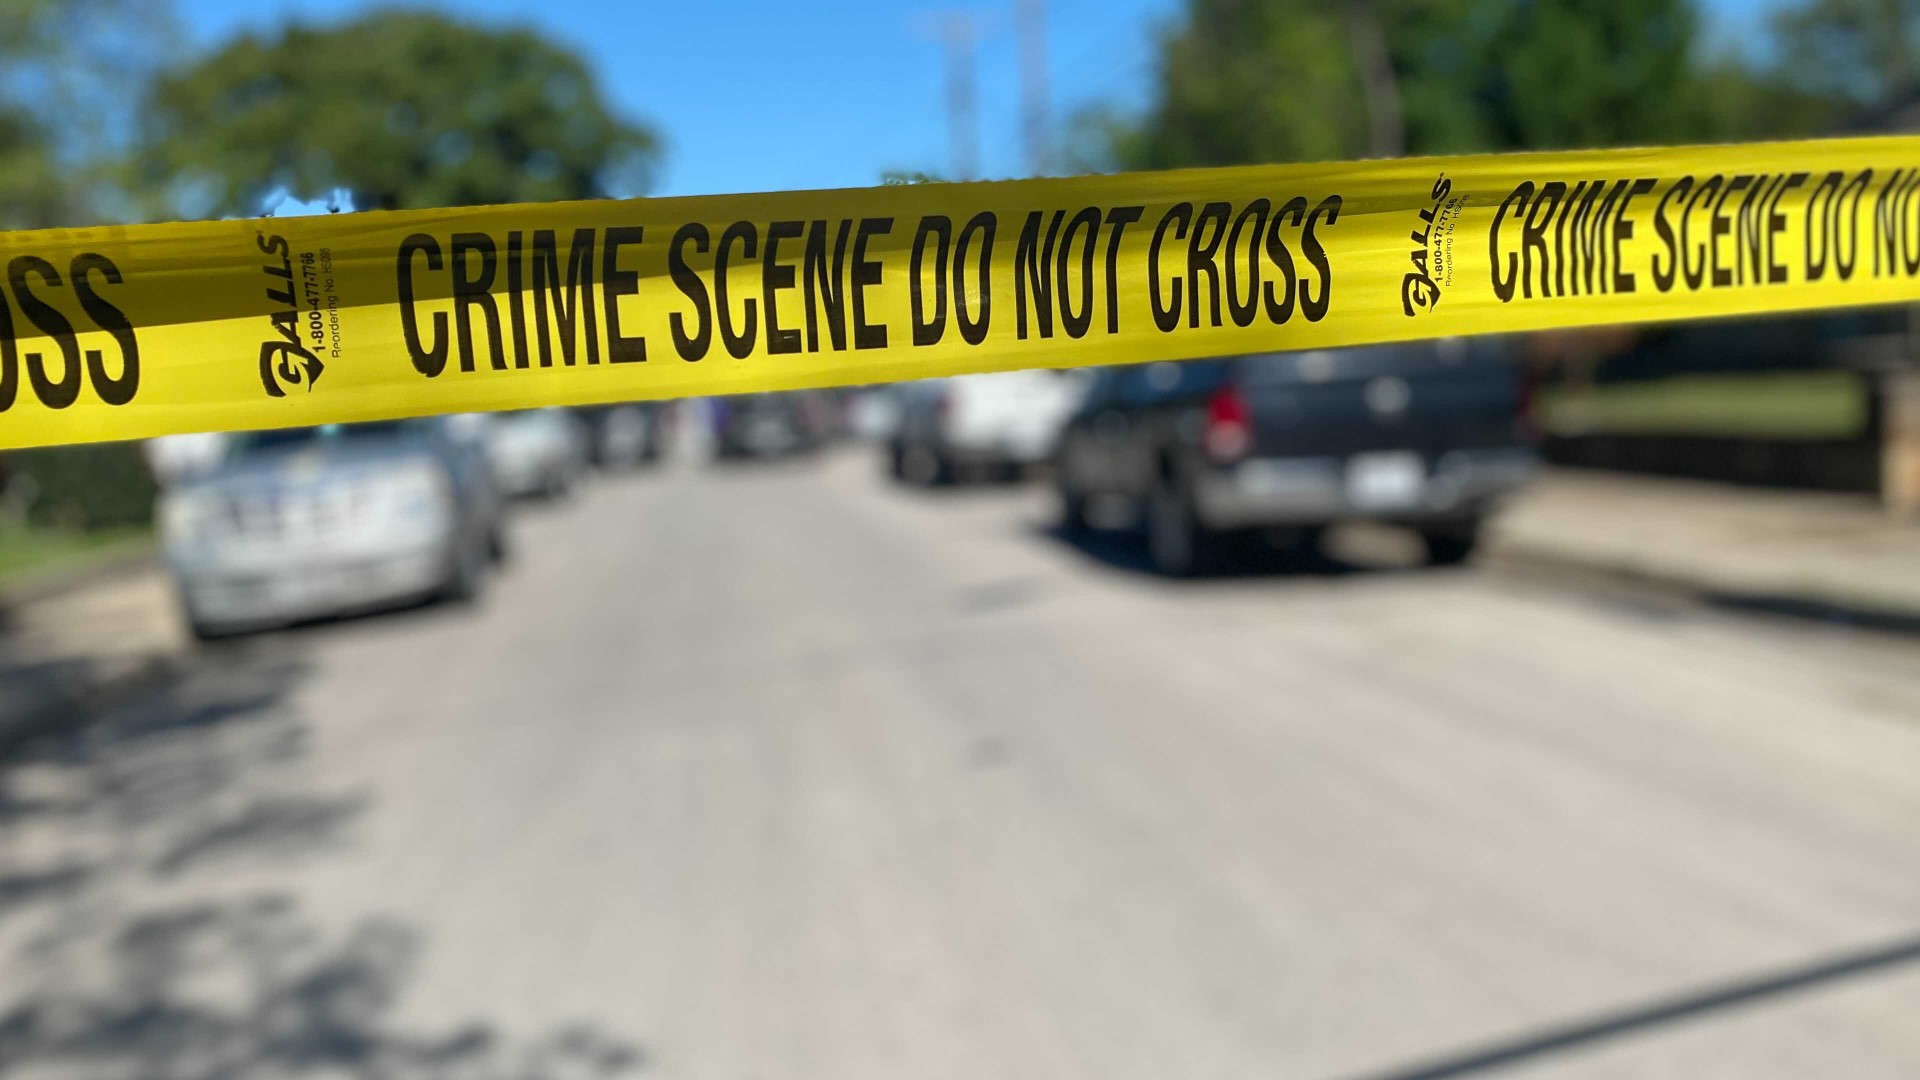 A Fort Worth police officer is unharmed and a suspect is on the way to a hospital in critical condition after a shooting in Fort Worth Sunday, police said.